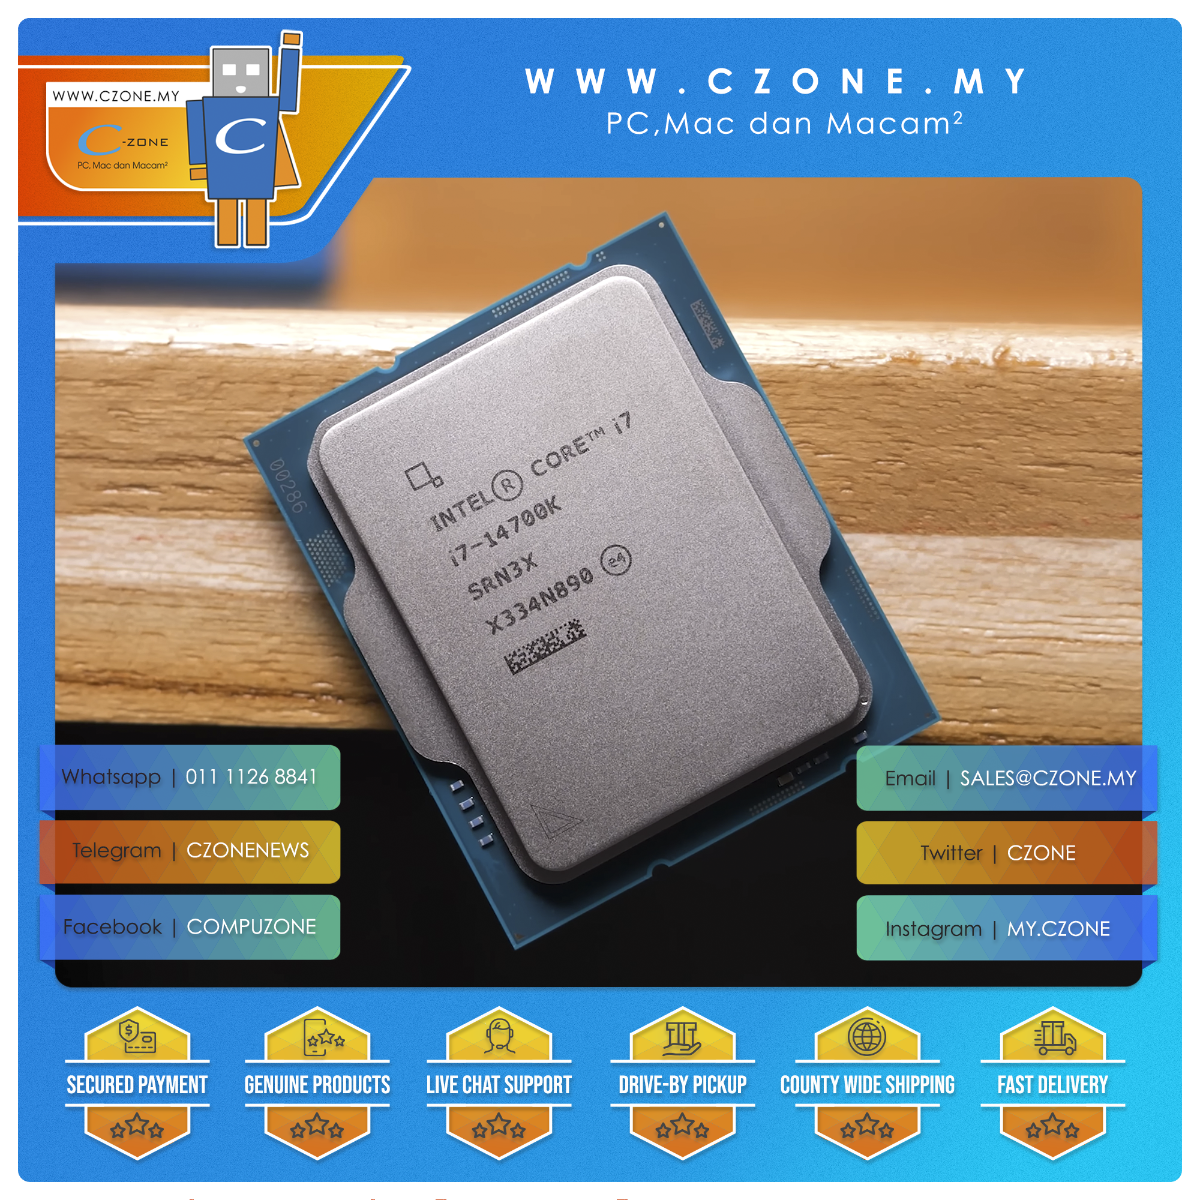 https://czone.my/czone/computer-components/core-components/cpu-processors.html